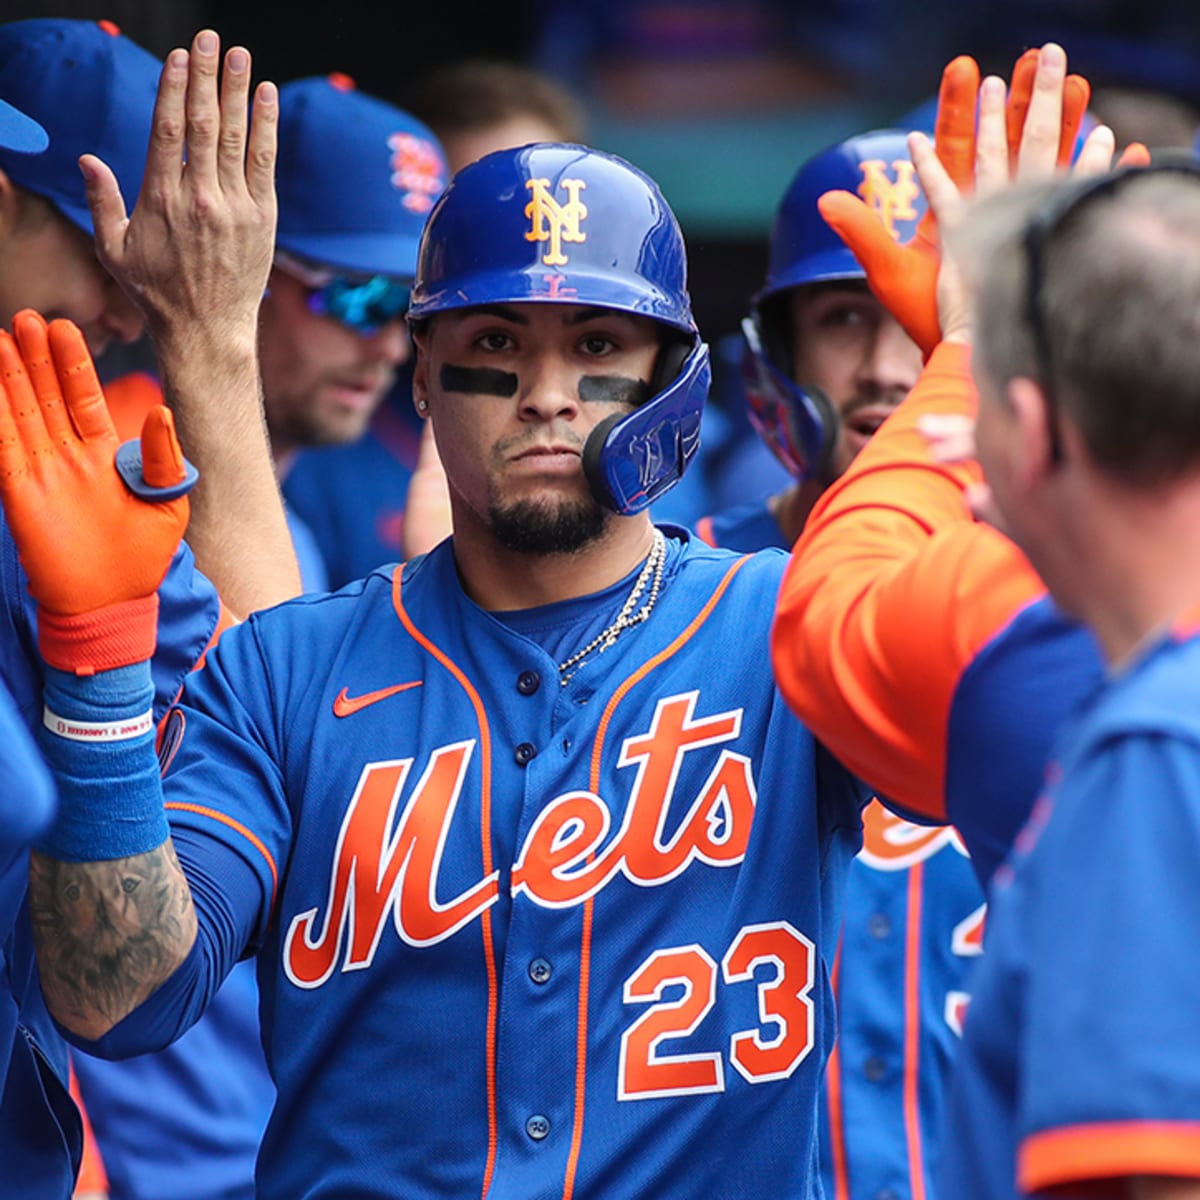 Boo who? Báez, Mets flip thumbs down on fans; team prez mad